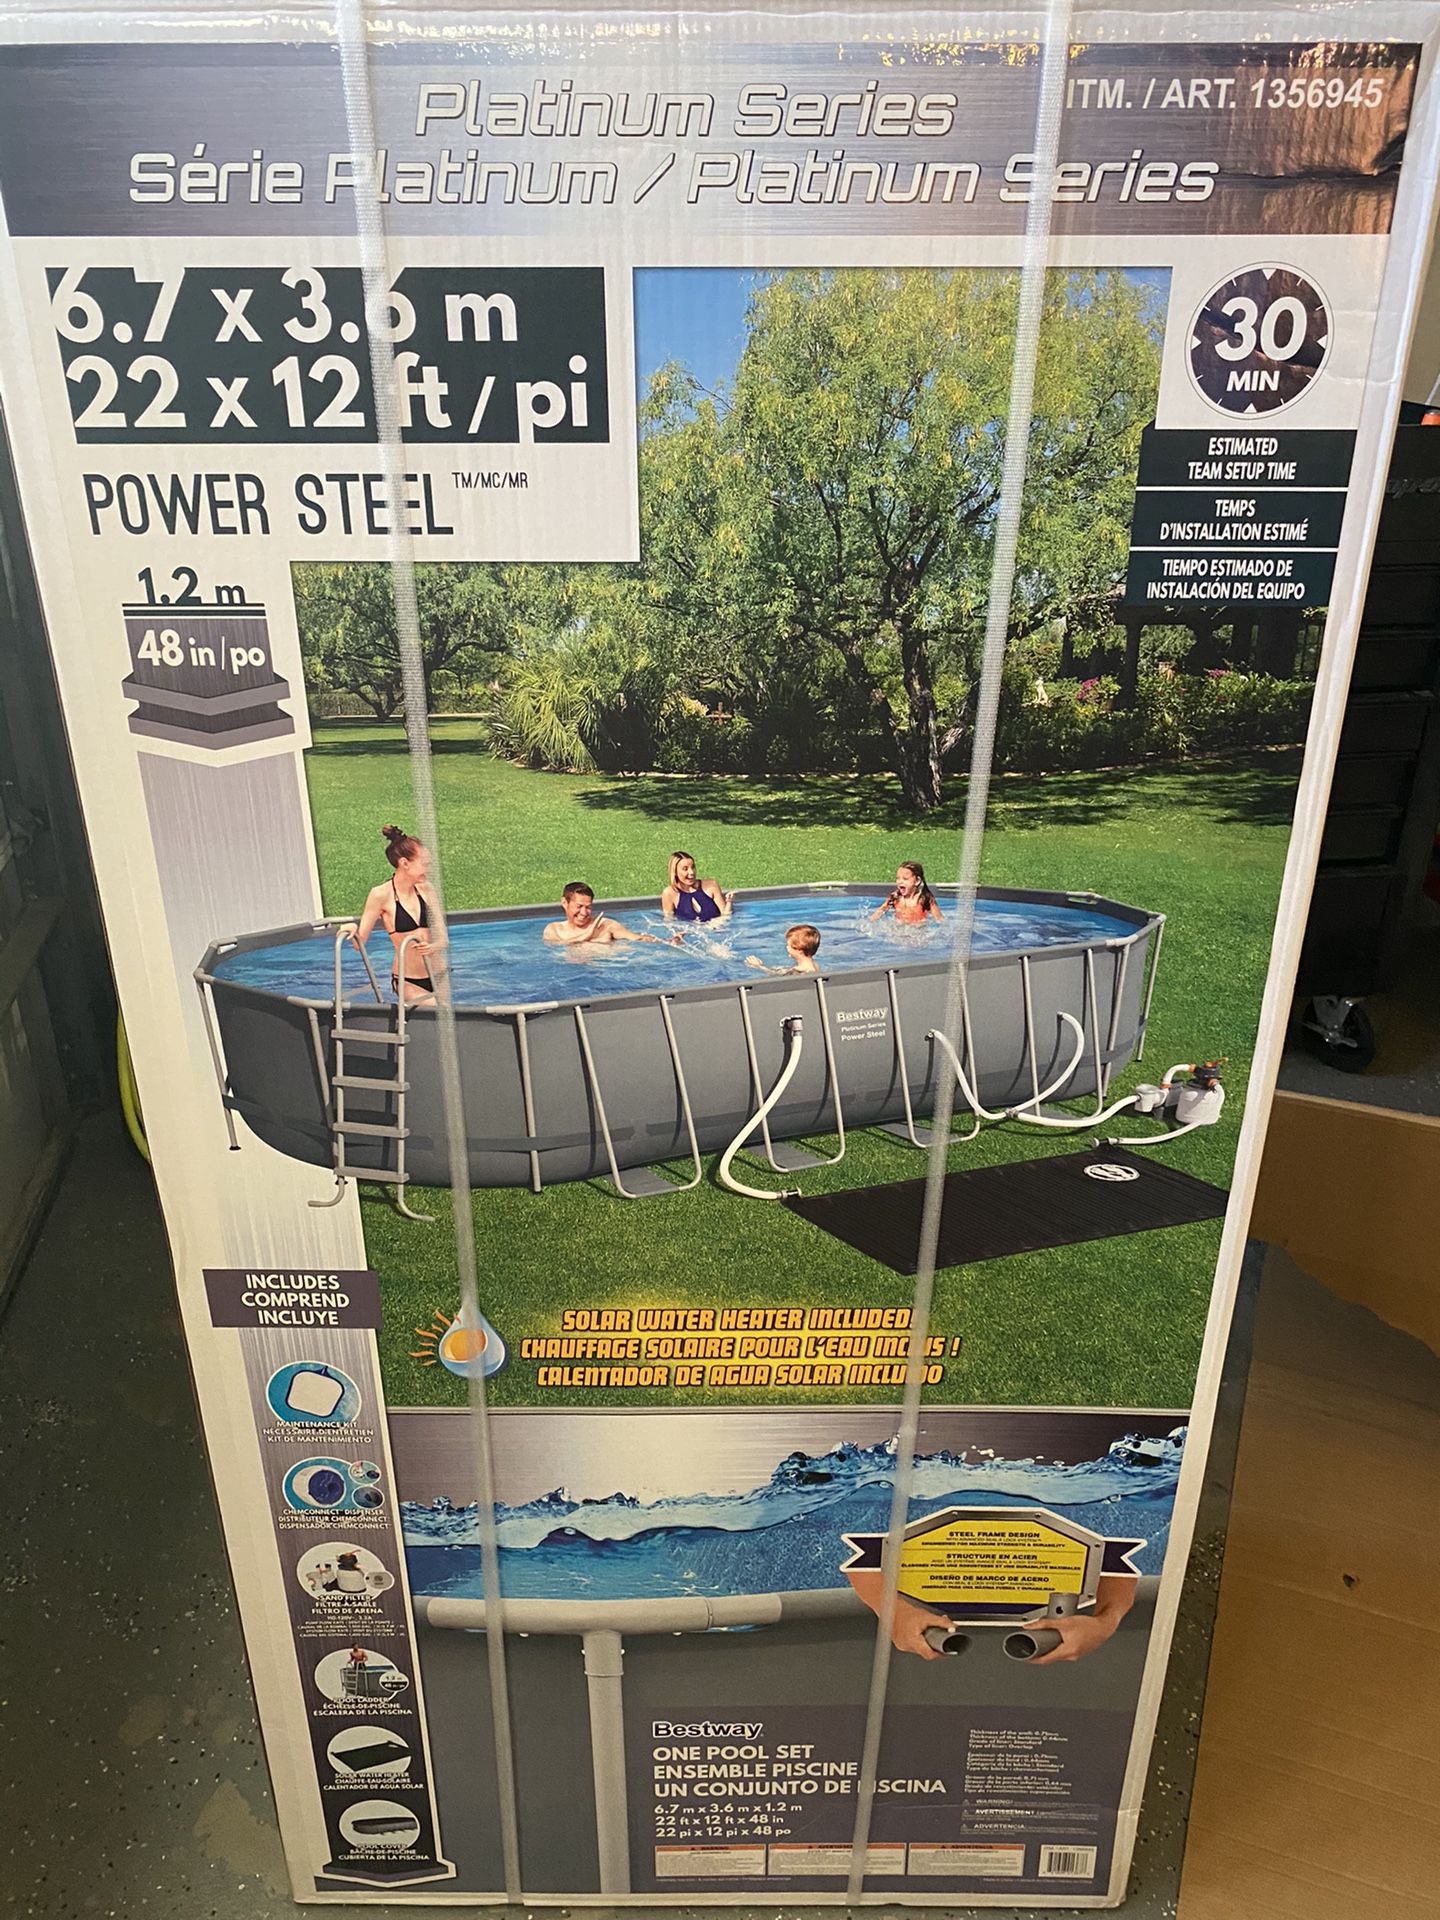 Brand new sealed 22 x 12 48 inches deep pool